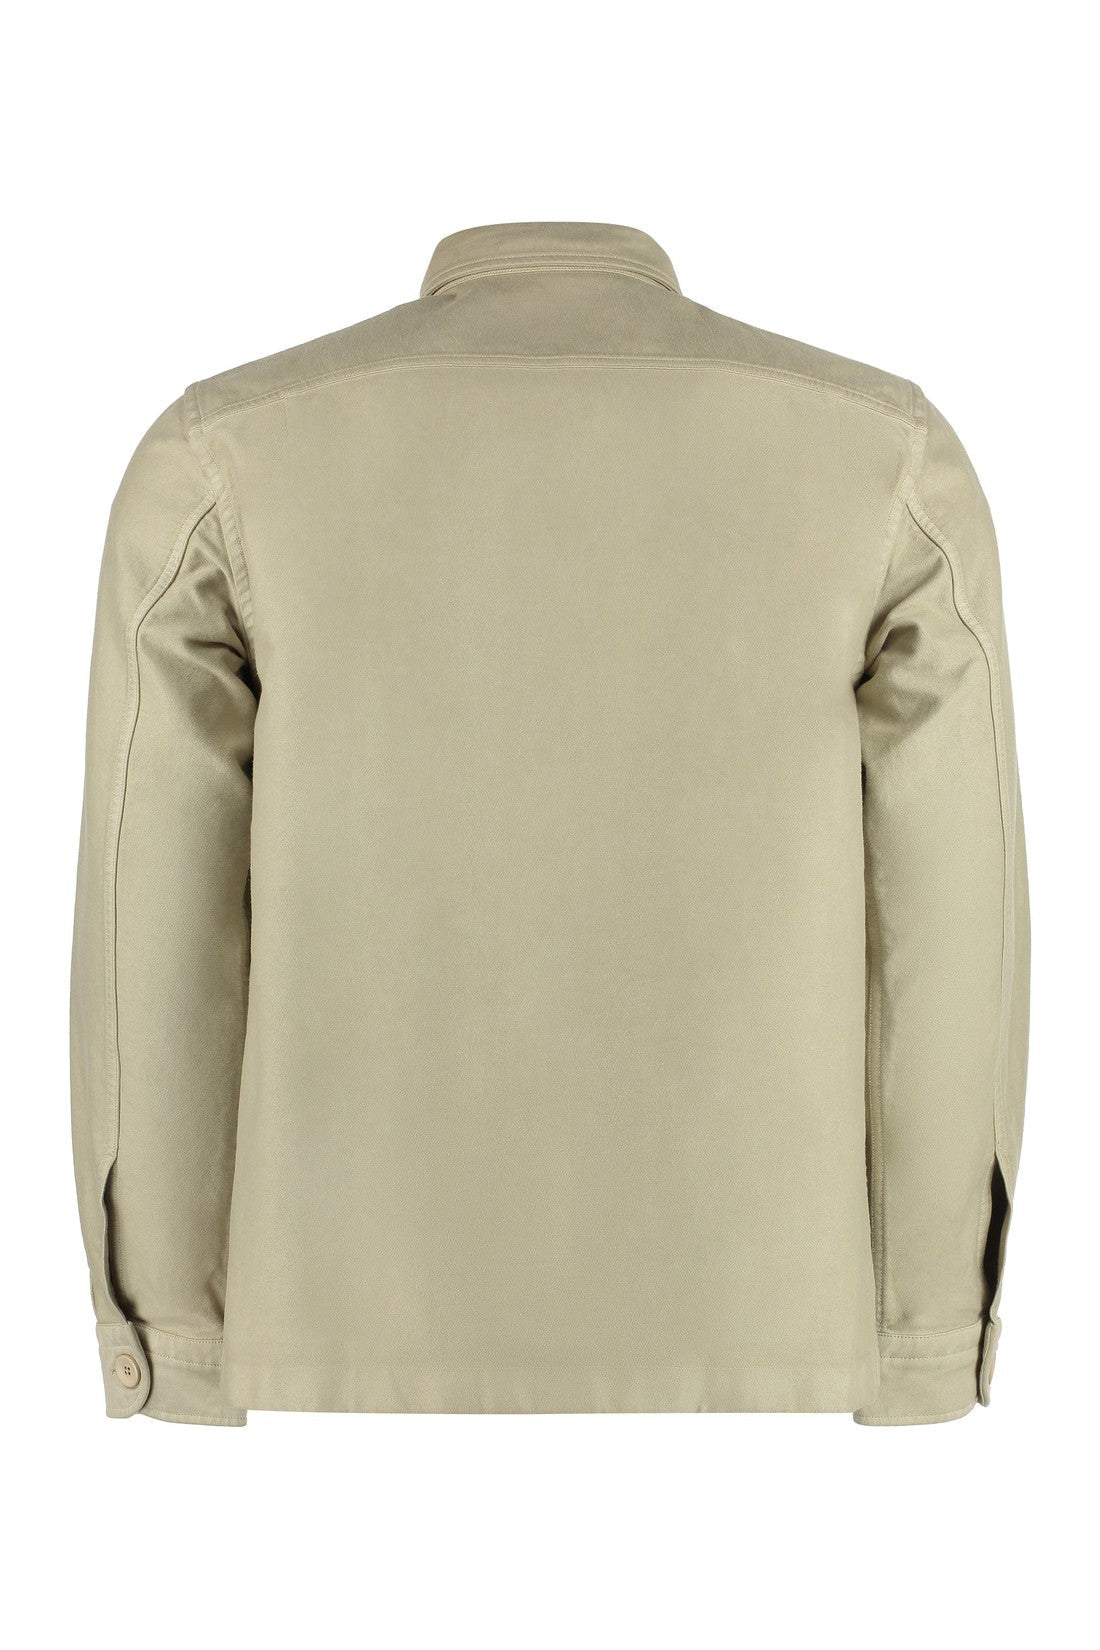 Tom Ford-OUTLET-SALE-Cotton overshirt-ARCHIVIST